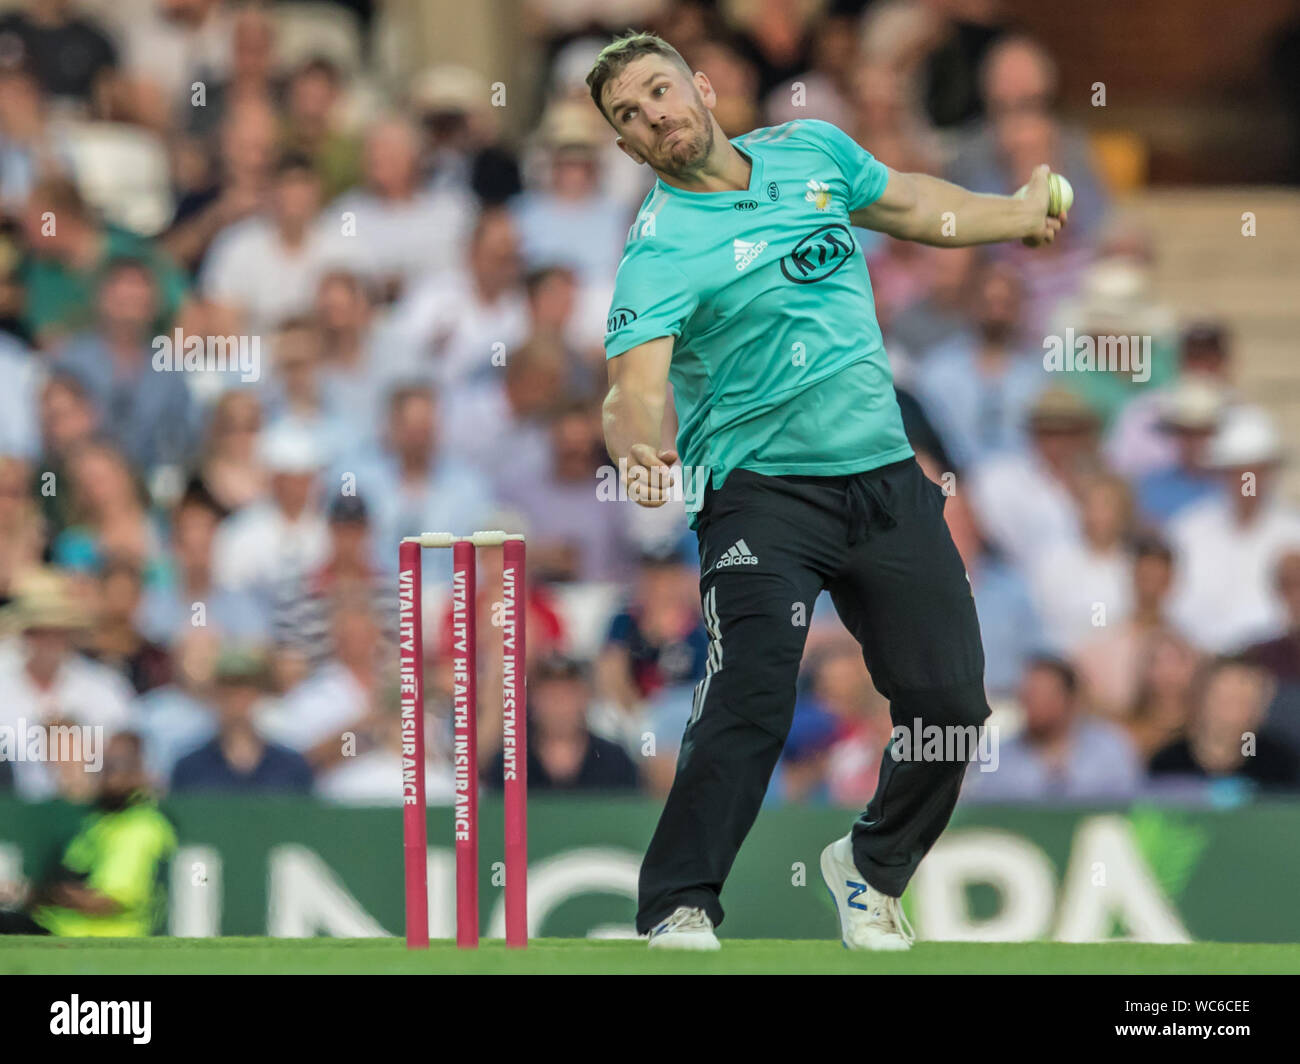 London, UK. 27 August, 2019.Aaron Finch bowling for Surrey against Somerset in the Vitality T20 Blast match at the Kia Oval. David Rowe/Alamy Live News Stock Photo